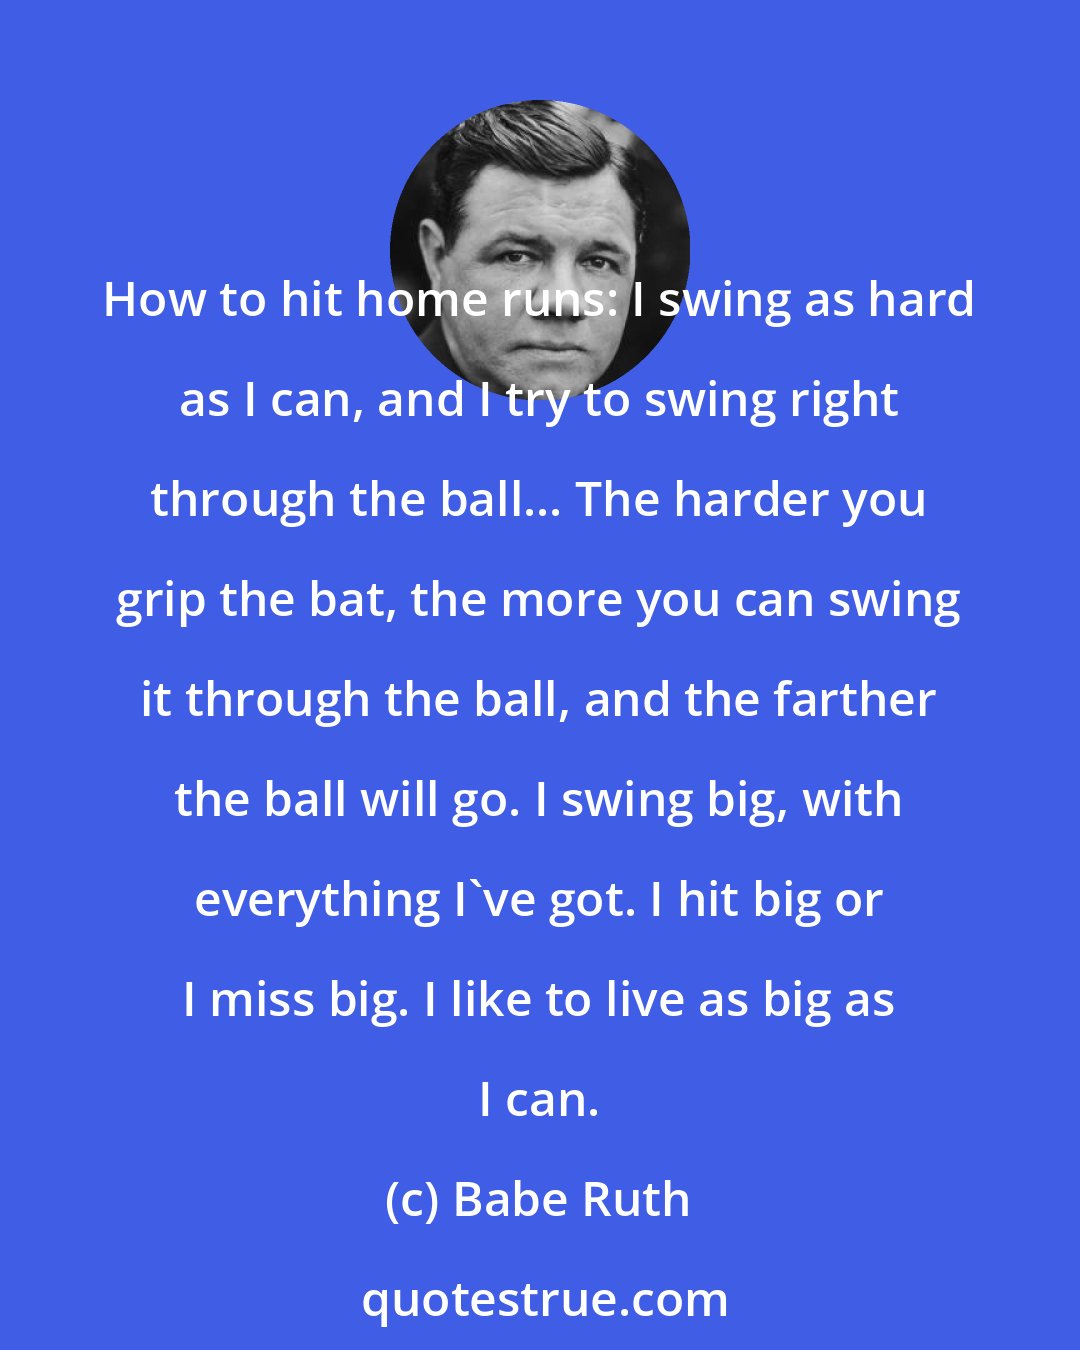 Babe Ruth: How to hit home runs: I swing as hard as I can, and I try to swing right through the ball... The harder you grip the bat, the more you can swing it through the ball, and the farther the ball will go. I swing big, with everything I've got. I hit big or I miss big. I like to live as big as I can.